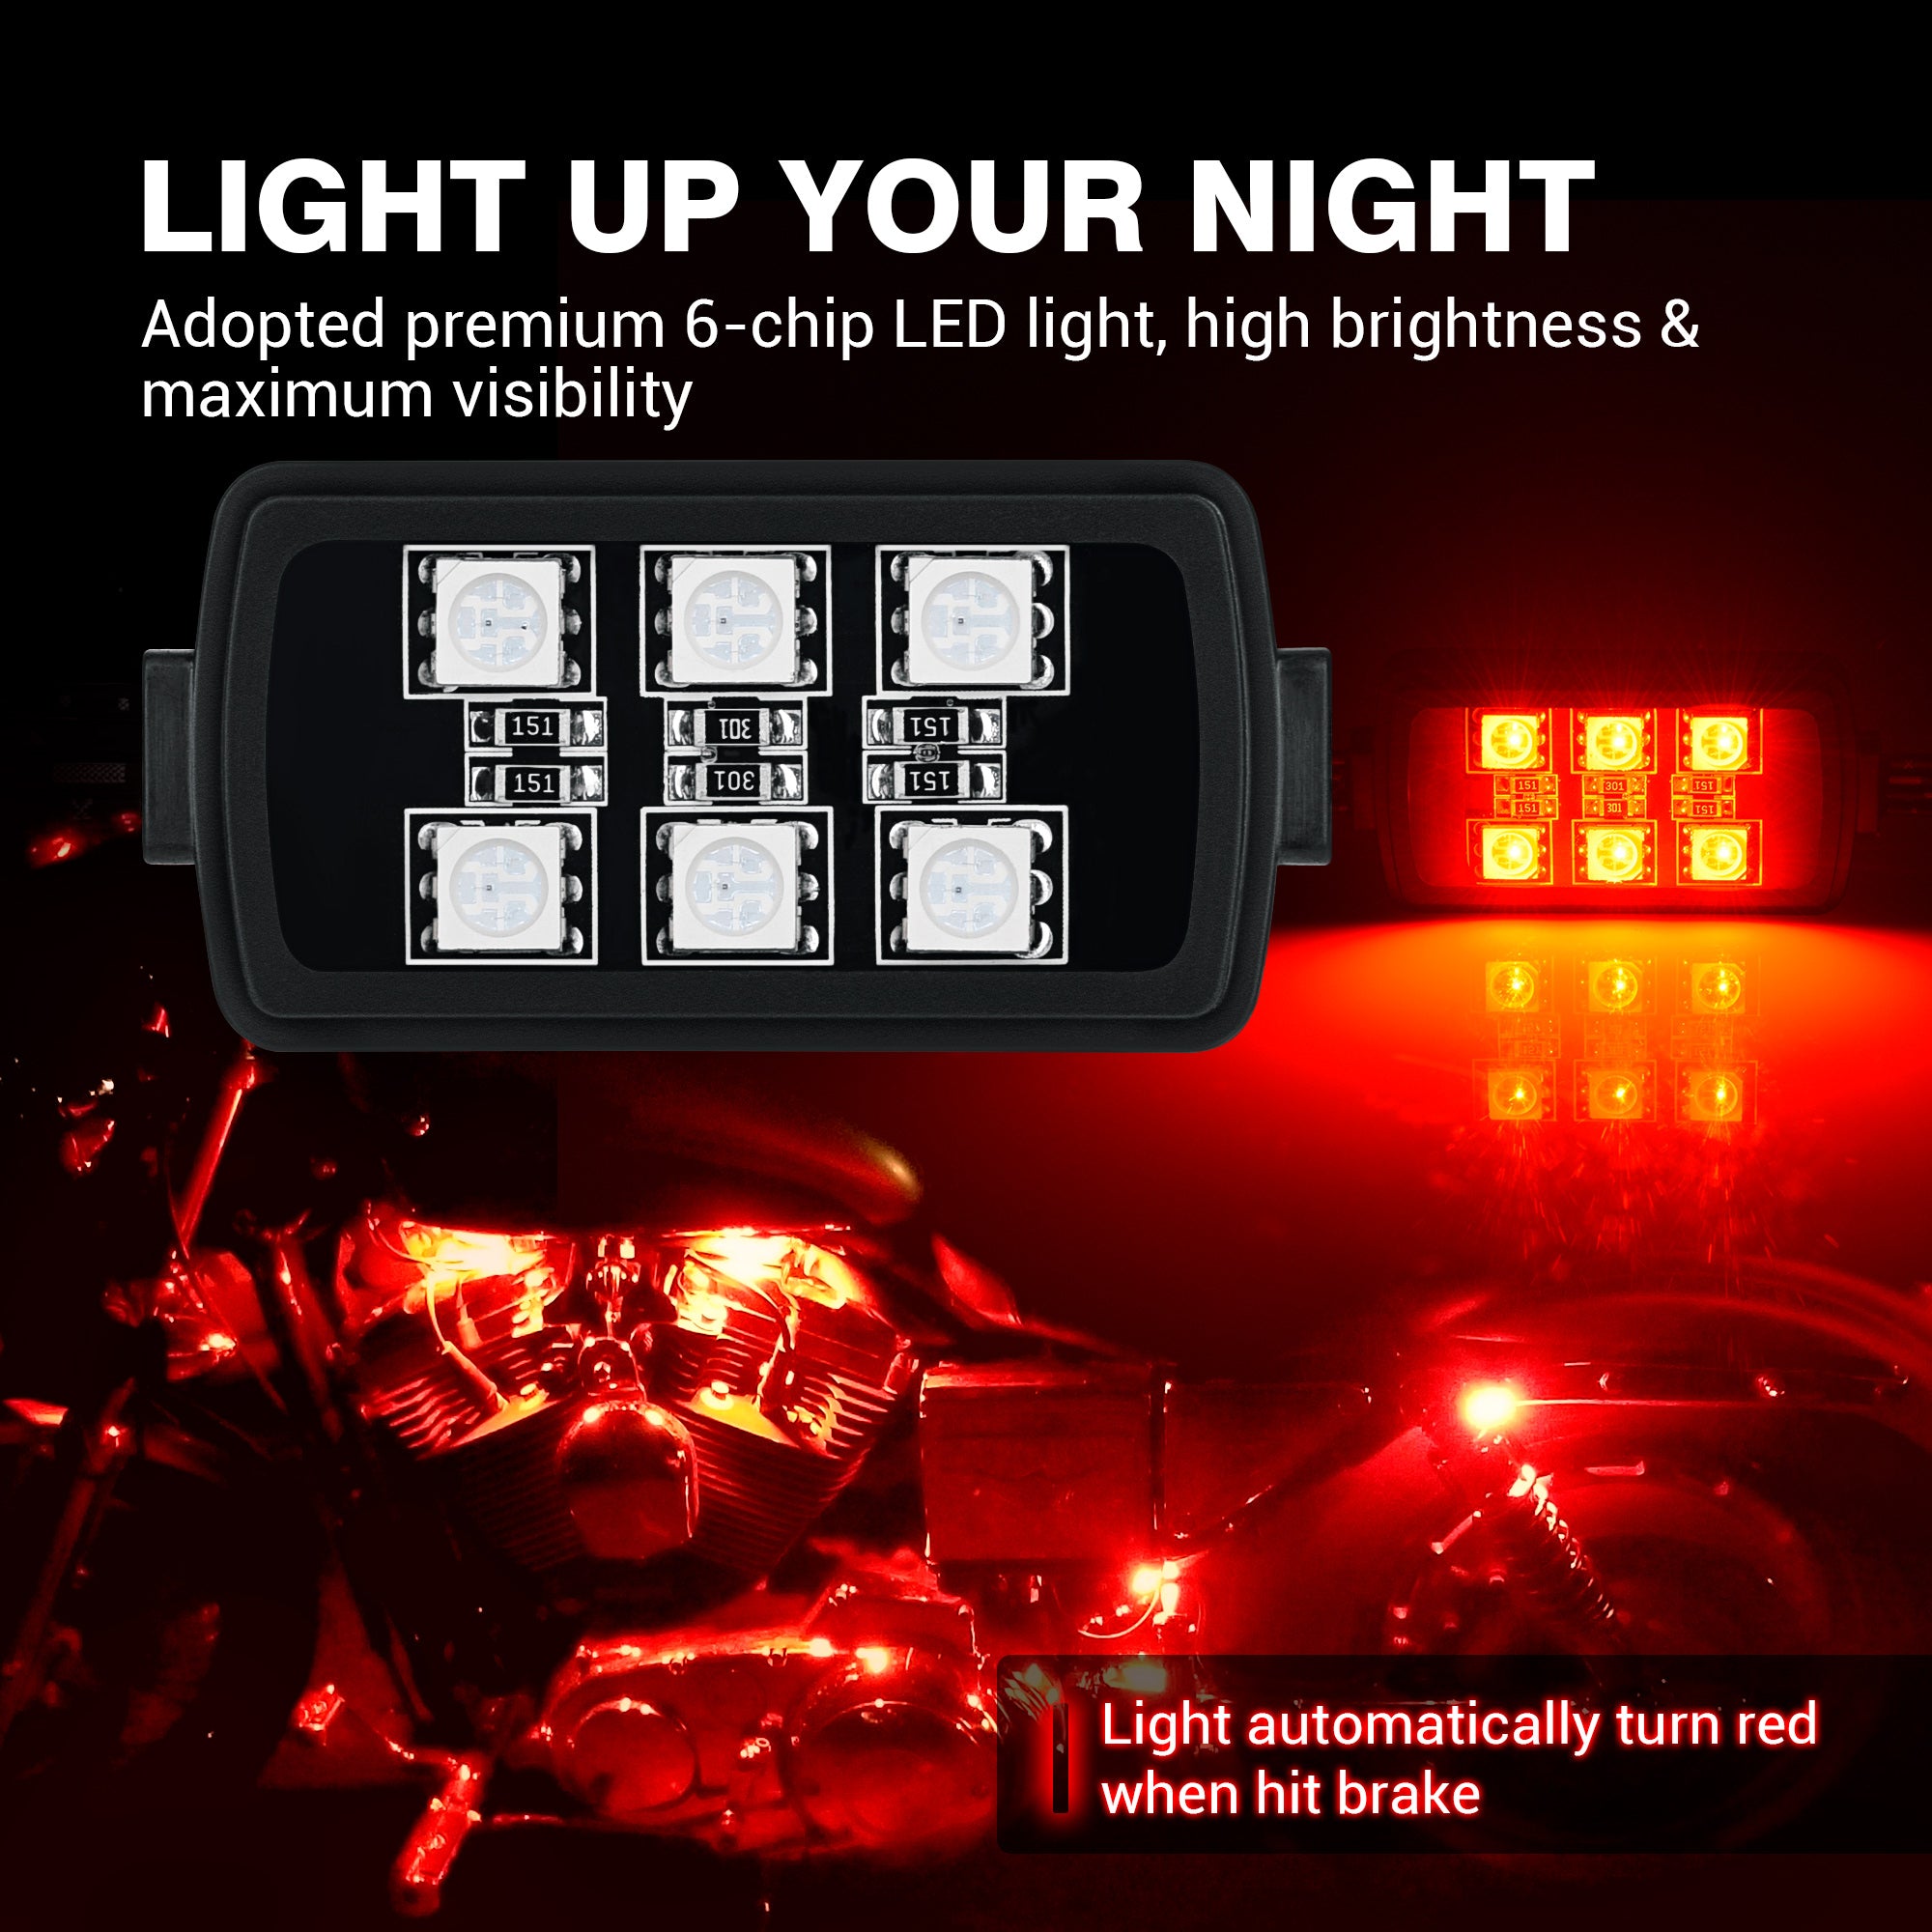 8pcs Motorcycle RGB LED Strip Lights Kit with Brake Light Function - Multi-Color Underglow LED Accent Glow Neon Lights Waterproof